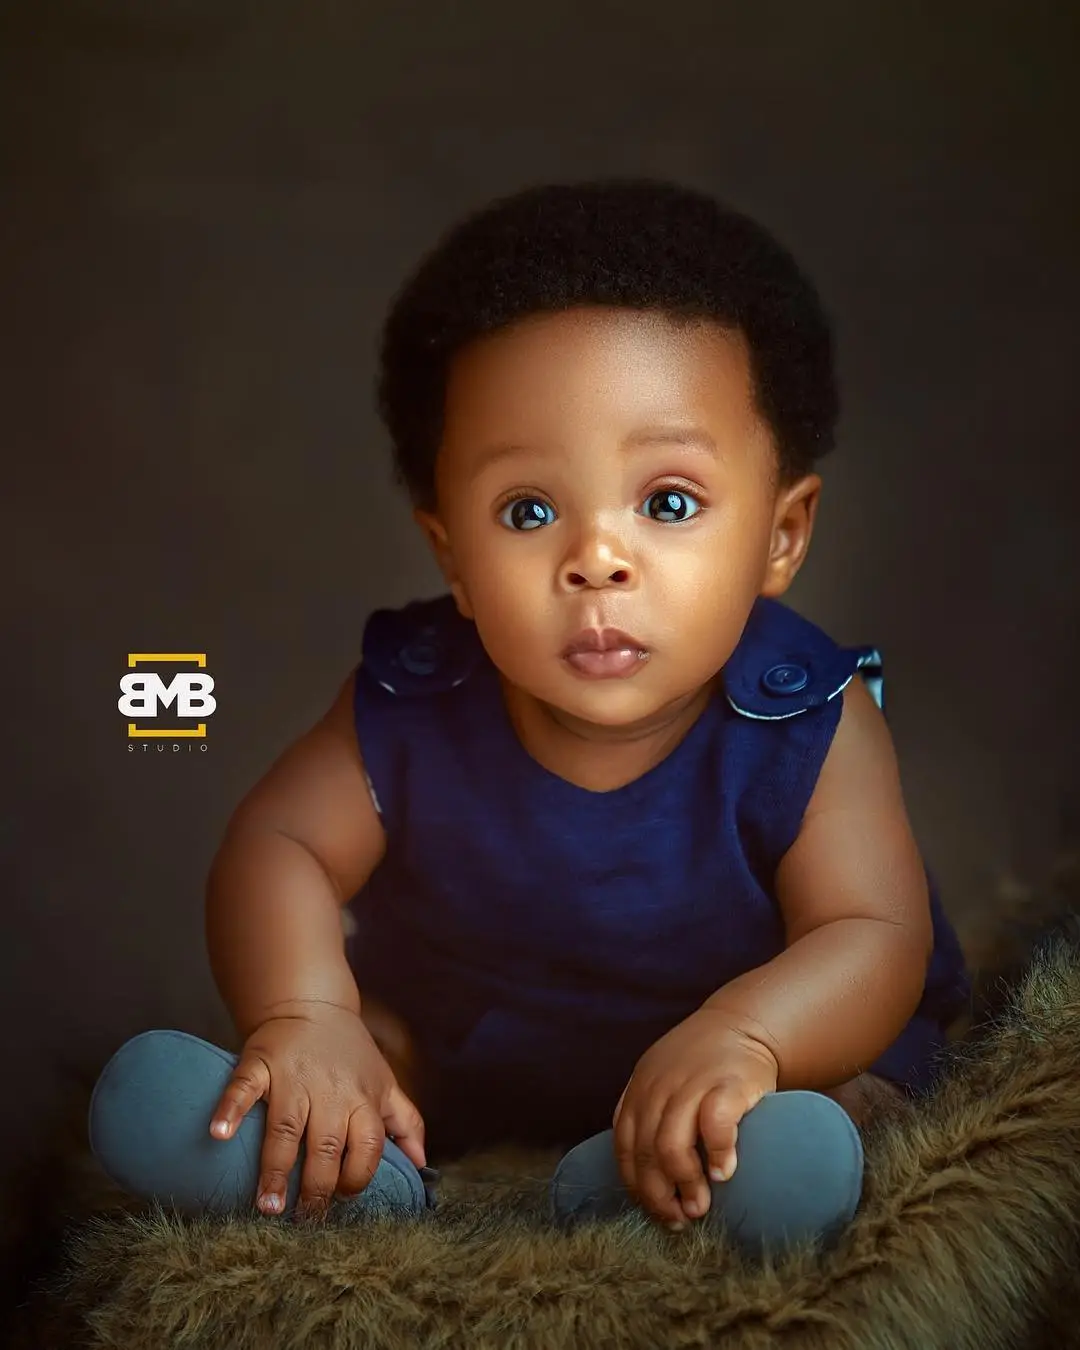 Enjoy these 50 adorable baby photos that are sure to bring a smile to your face!